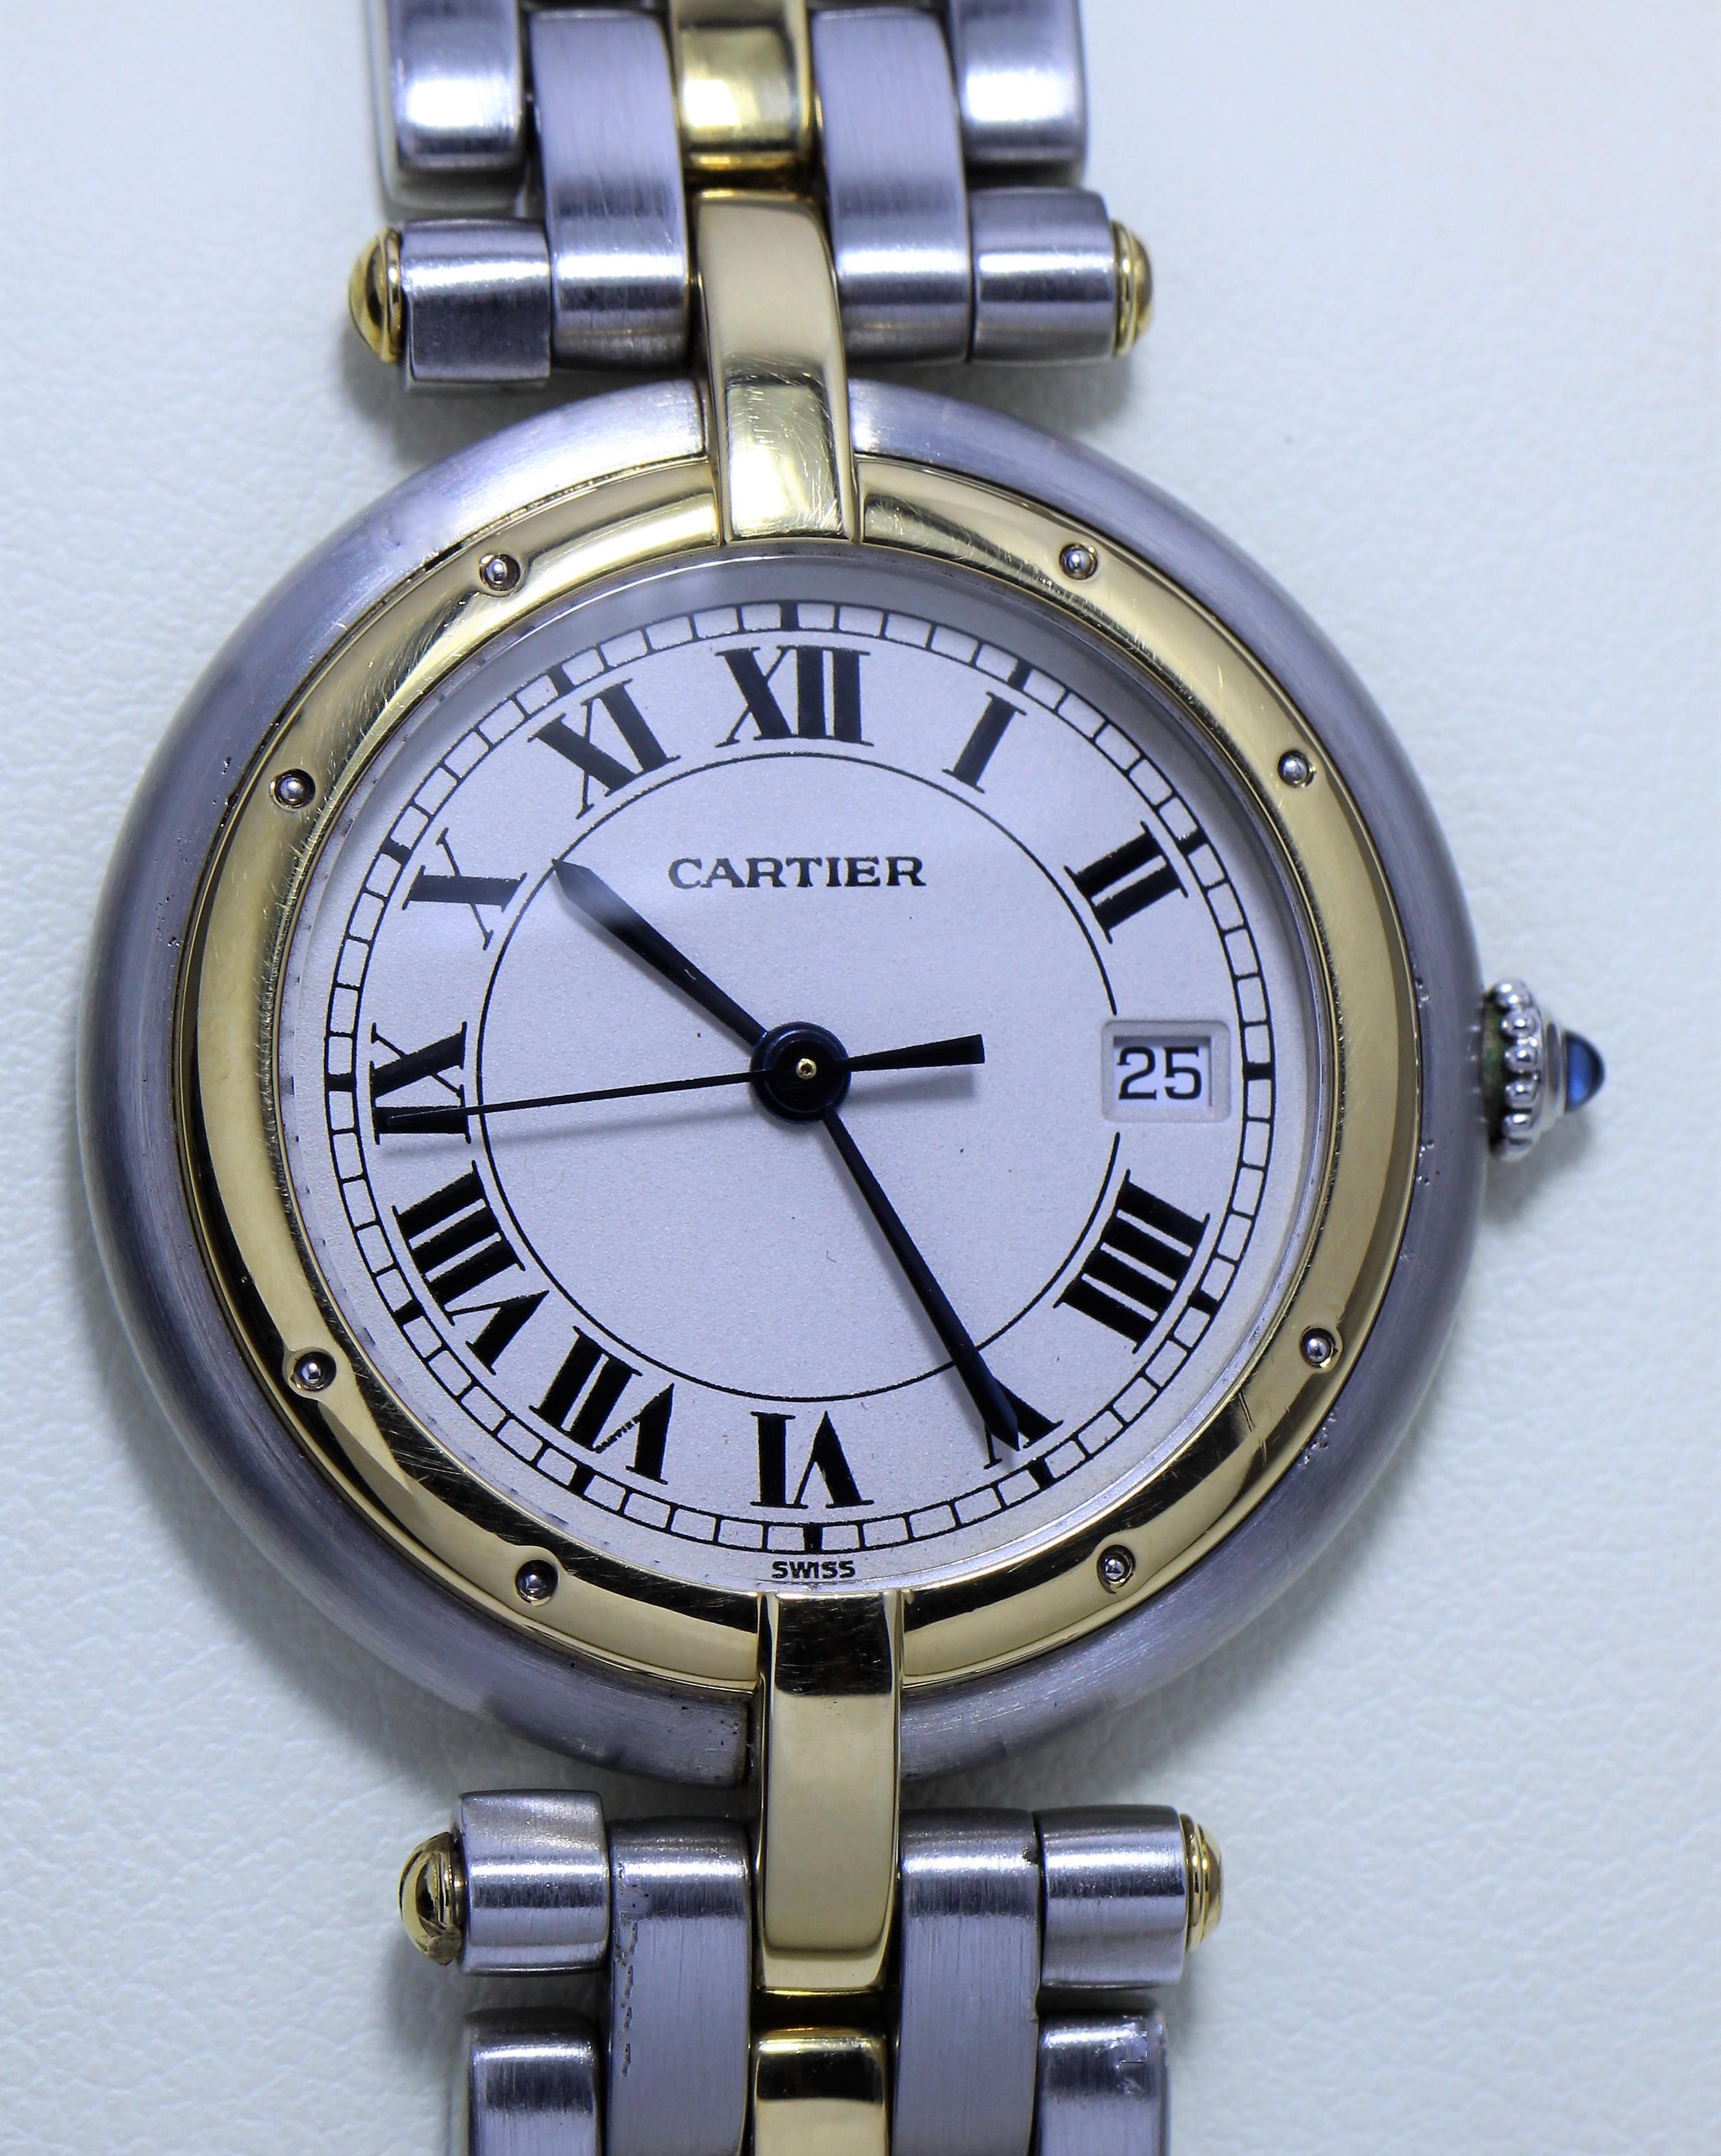 Cartier Women's Bicolor (Gold/Silver) Stainless Steel Watch
White Face with Roman Numeral hour markers